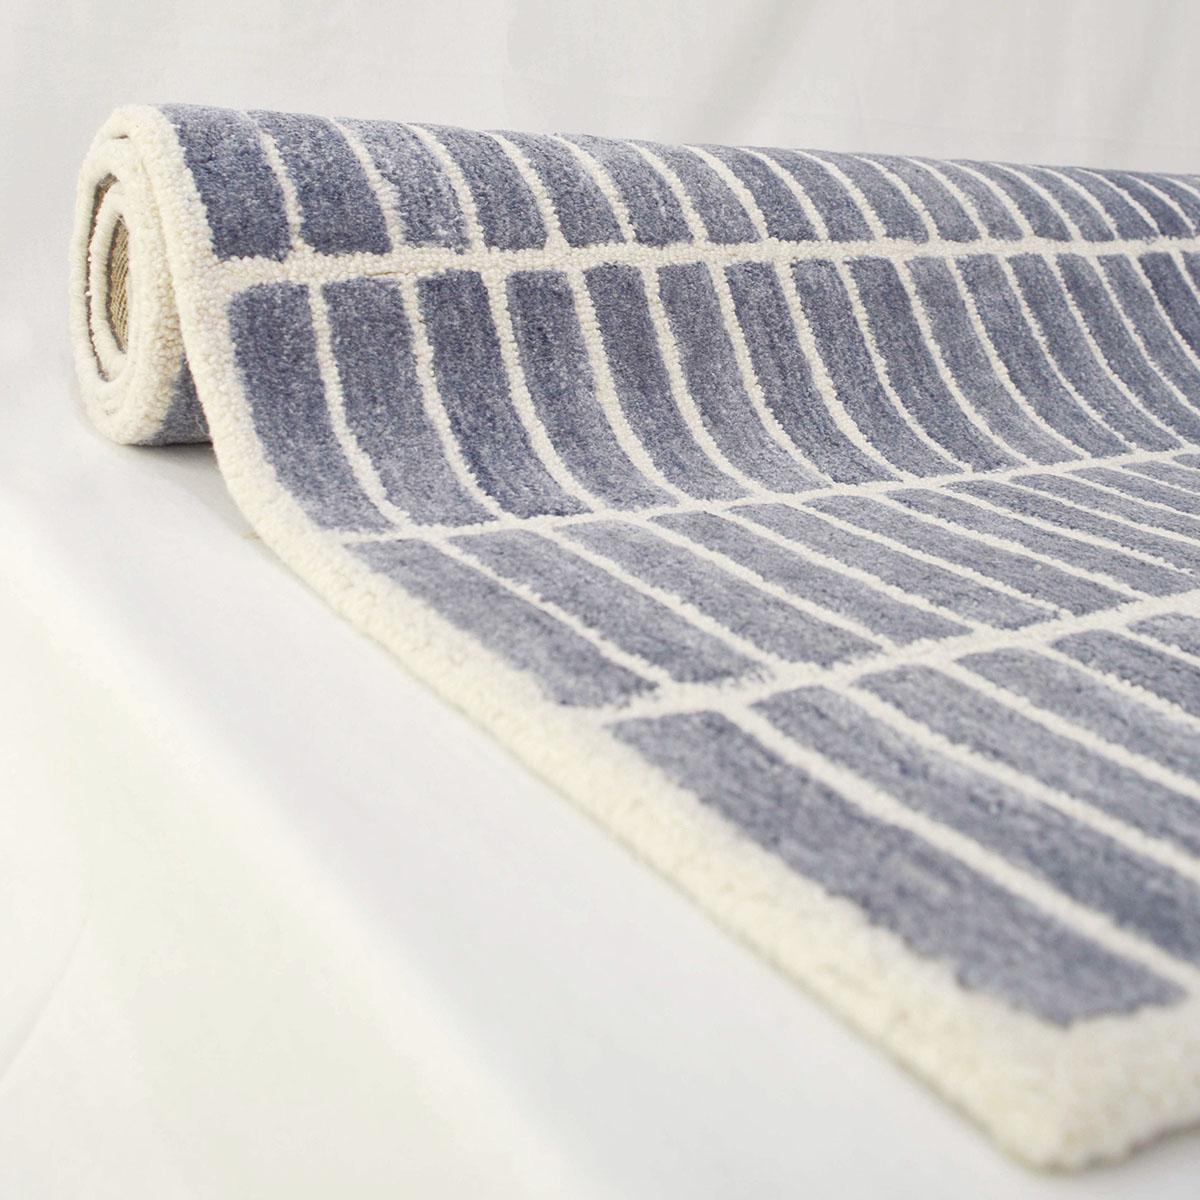 Carpet - Trellis, wool and viscose blend, sizes available